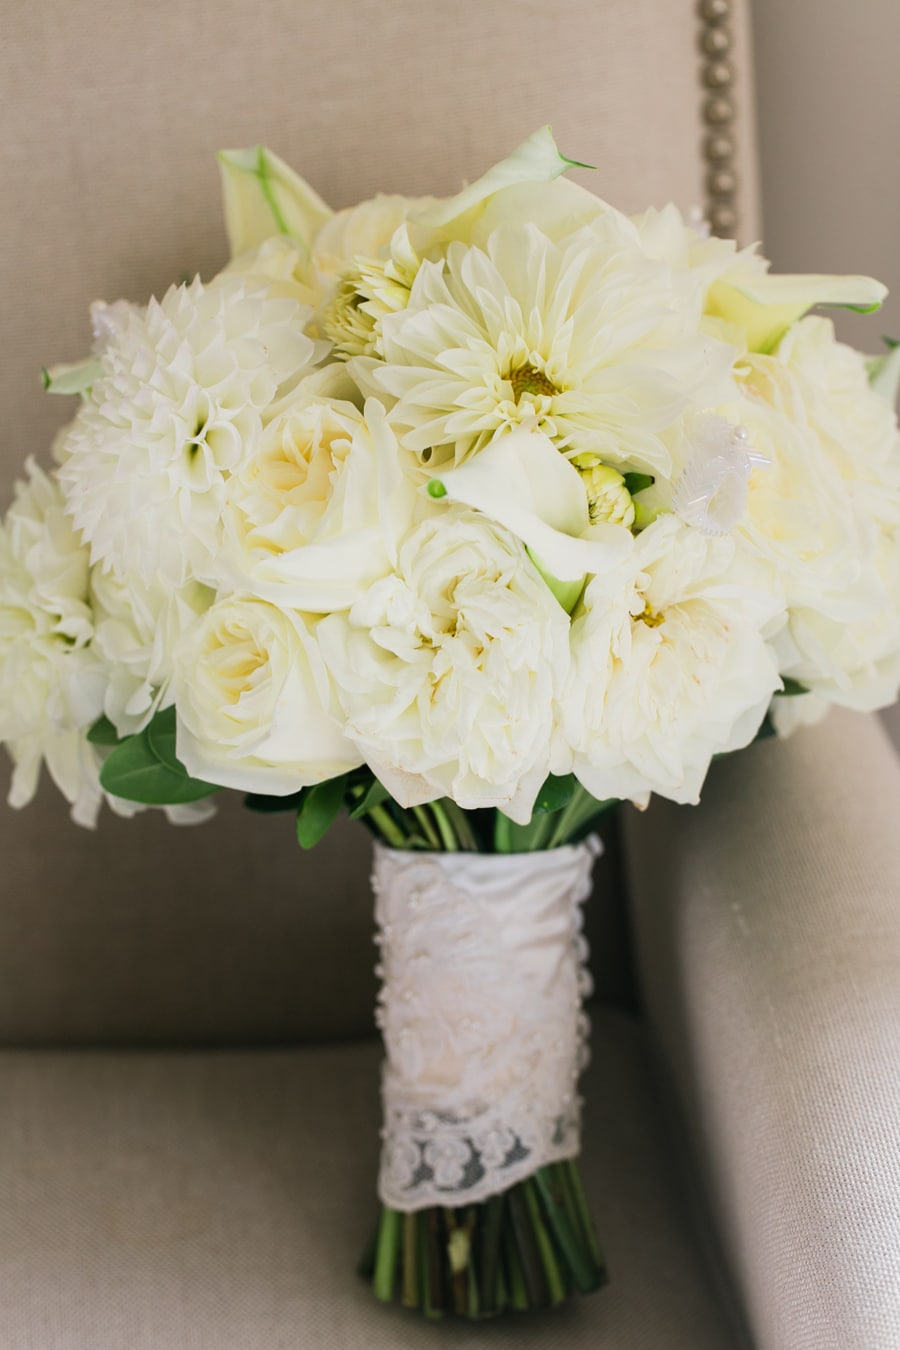 A beautiful all white bridal bouquet by Stems in Chicago